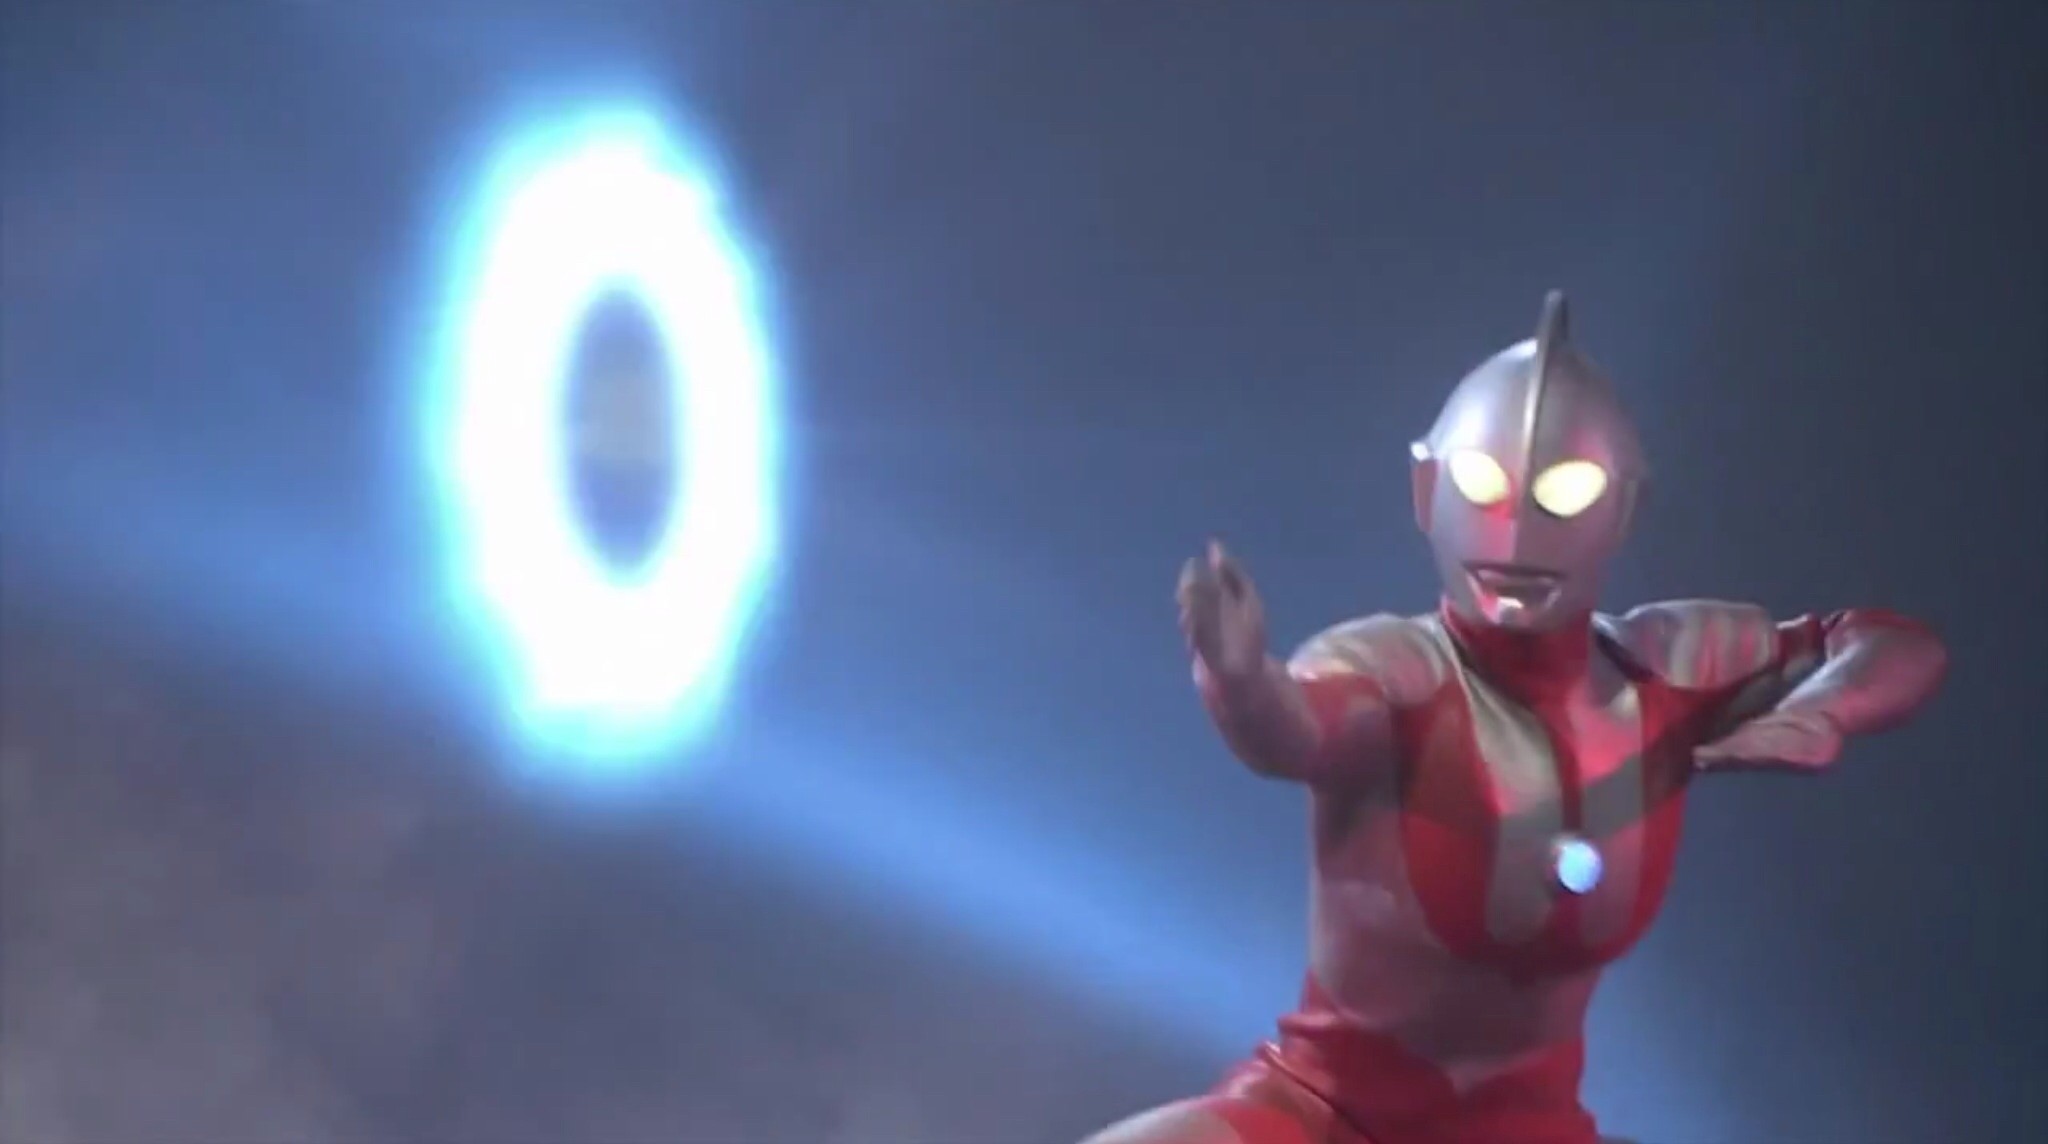 2048x1144 Ultraman performs his Ultra-slash move (Photo courtesy of http://ultra